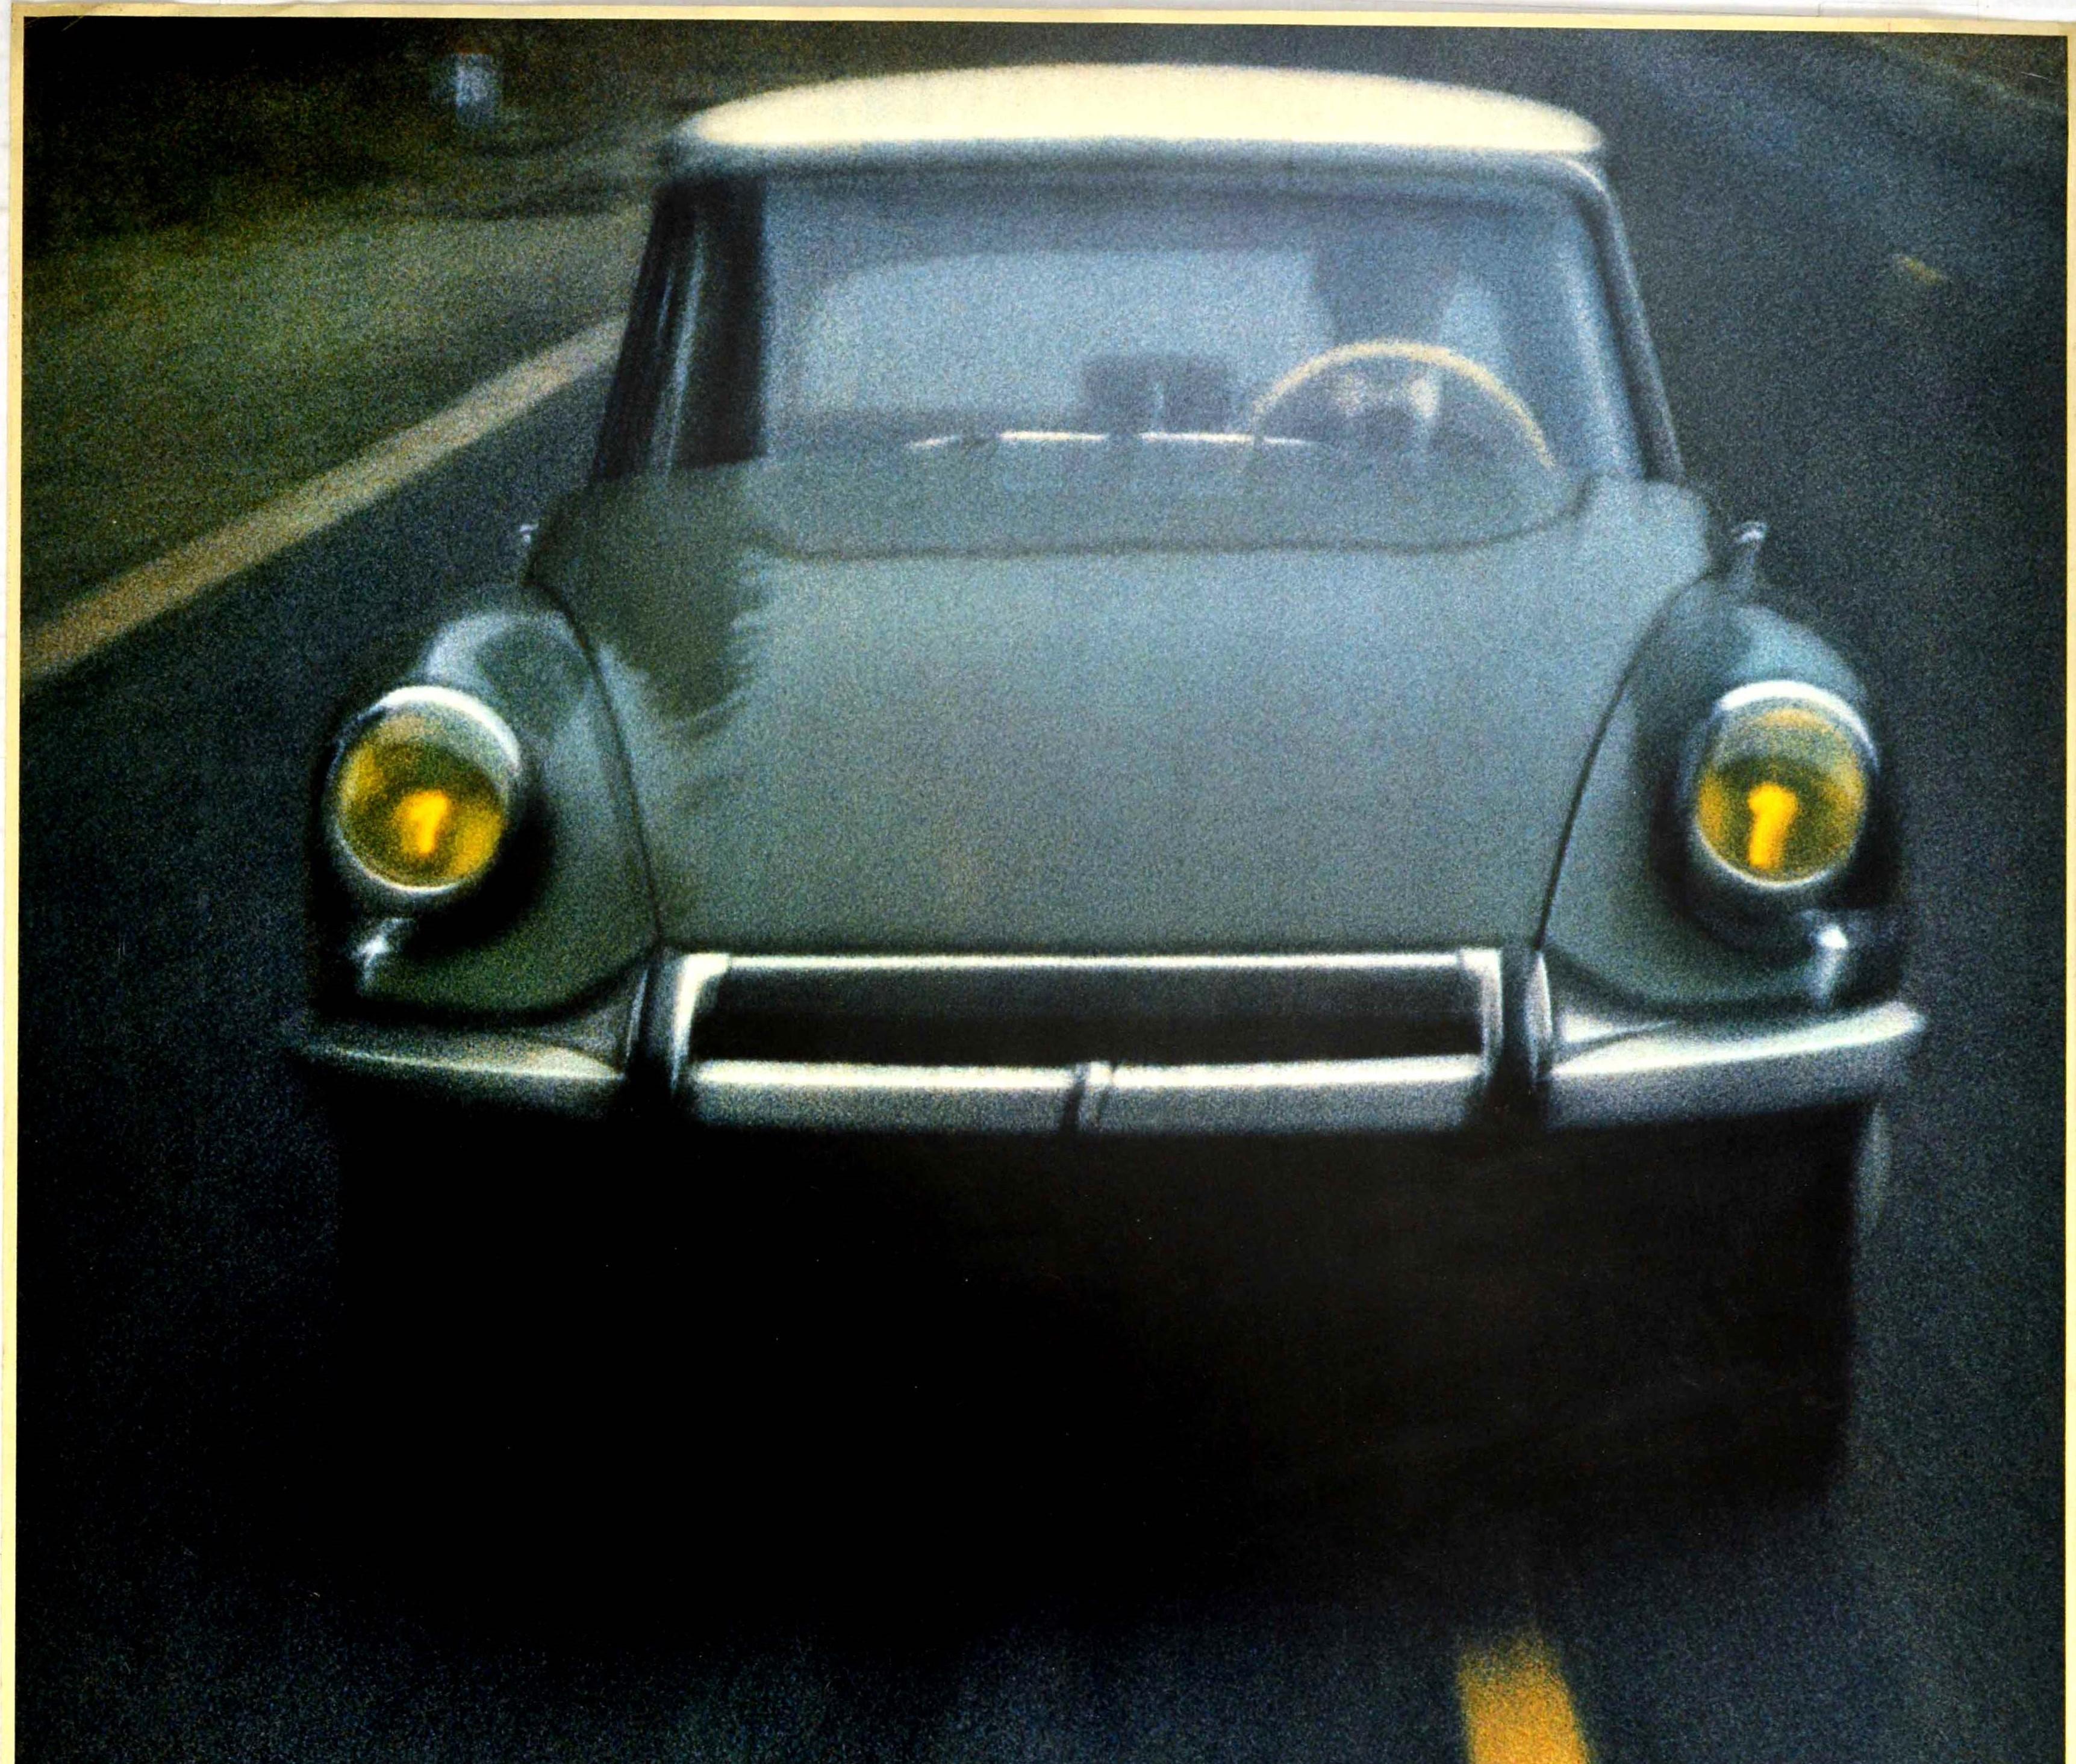 Original Vintage Advertising Poster Citroen DS On The Road Car Design Photograph - Print by Martin Andre